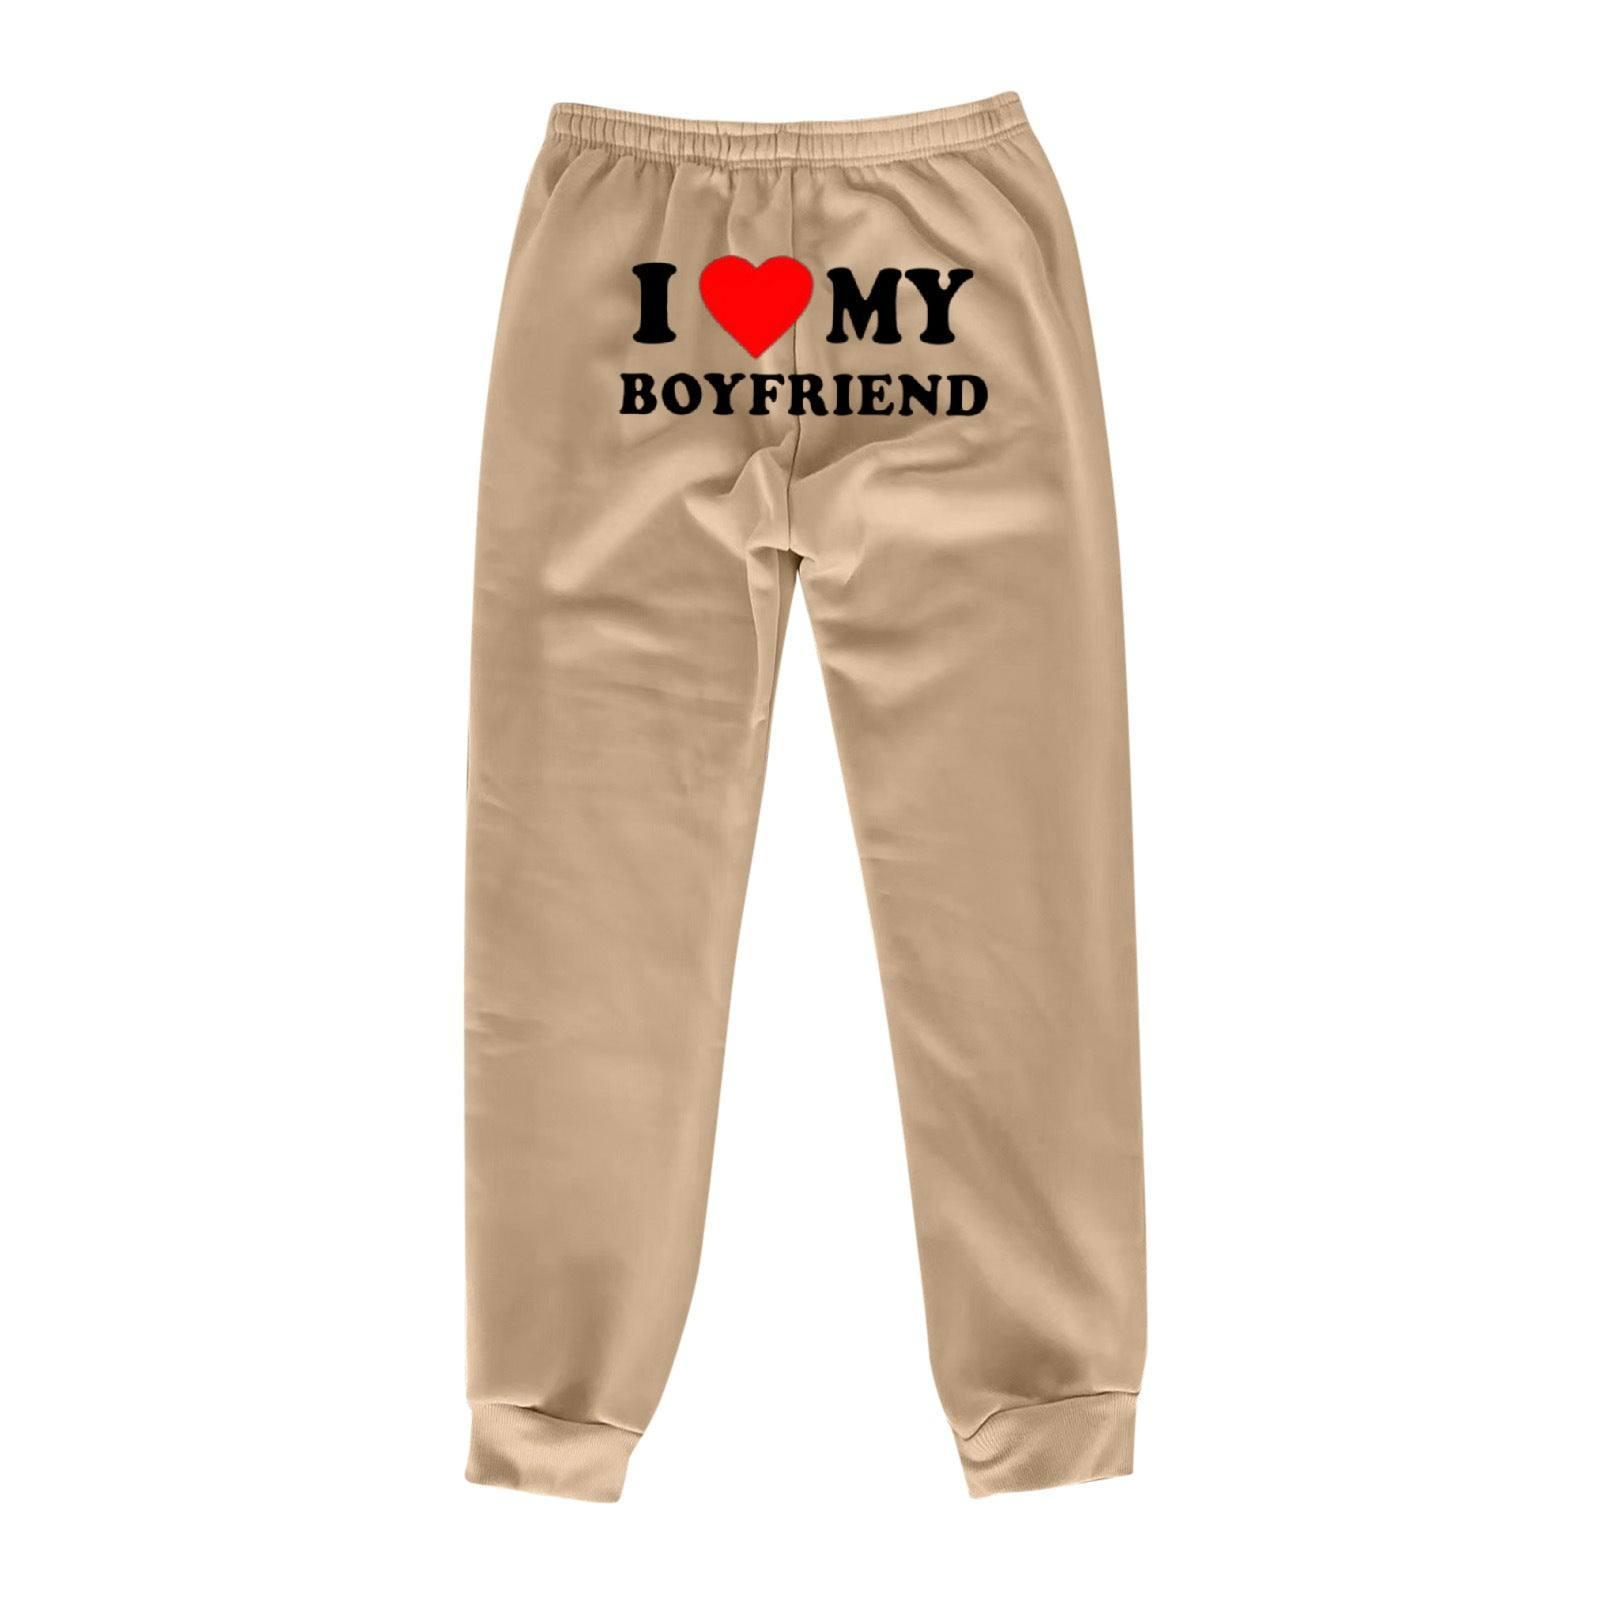 I Love MY BOYFRIEND Printed Trousers Casual Sweatpants Men-Camel Back Picture-12